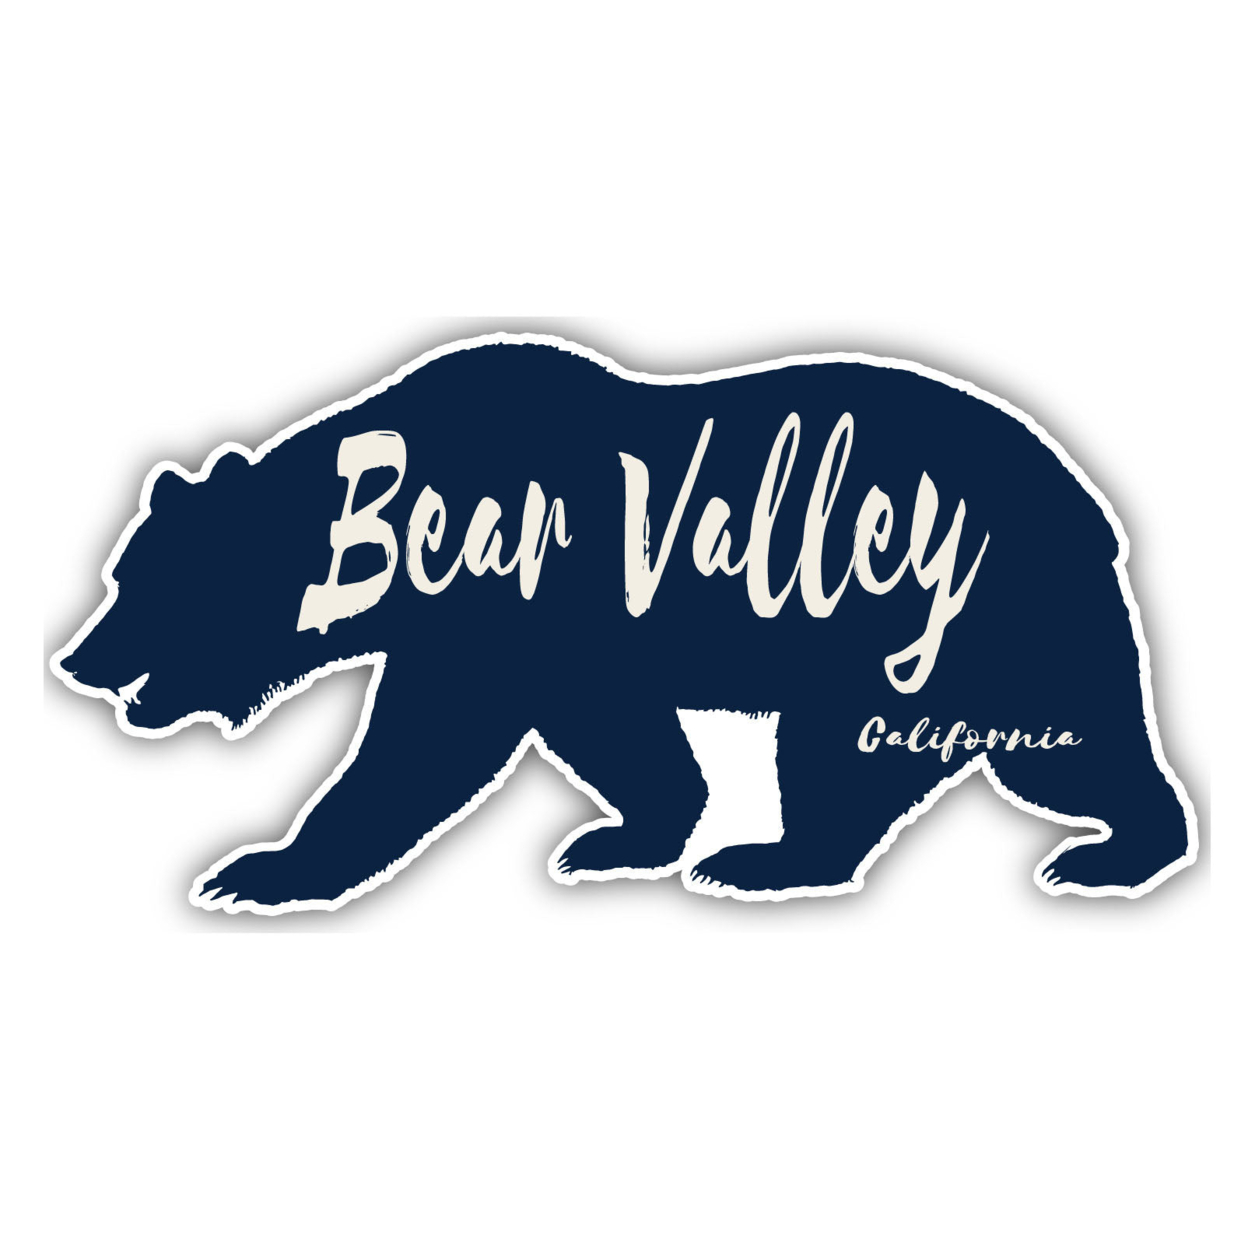 Bear Valley California Souvenir Decorative Stickers (Choose Theme And Size) - Single Unit, 10-Inch, Great Outdoors